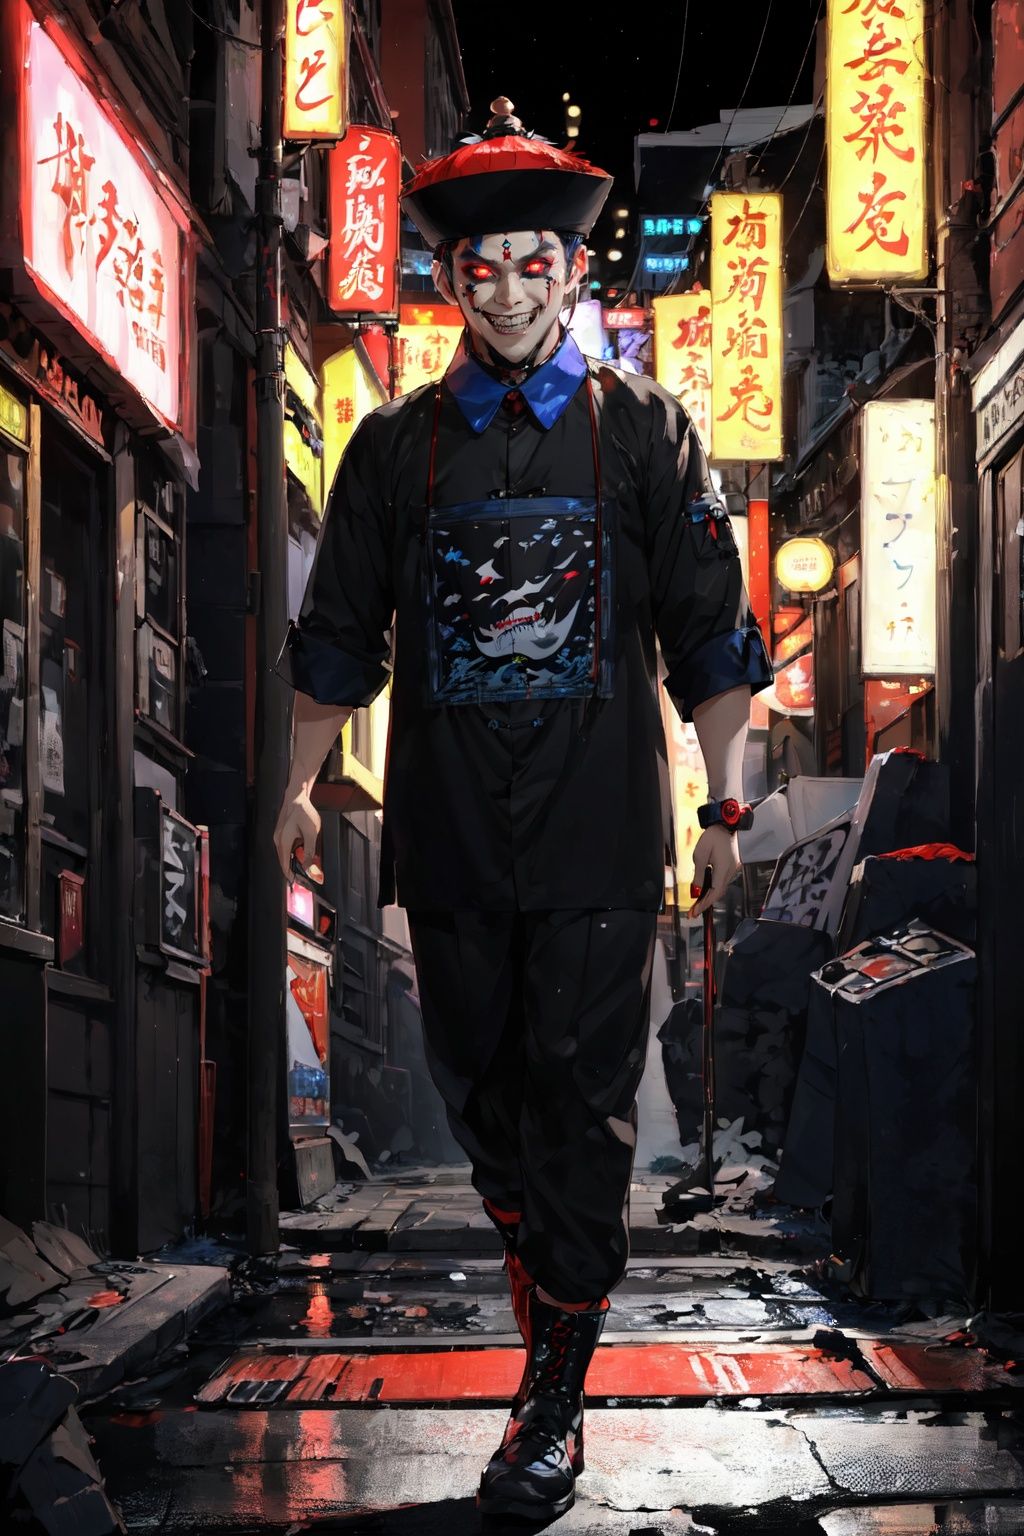 ((masterpiece)),((best quality)),8k,high detailed,ultra-detailed,upper body,((huangfu paper on head)),1boy,jiangshi costume,painted face,makeup,glowing red eyes,<lora:QDjiangshi:0.75>,((urban comedy scene)),(full-body portrait),(comical pose),(evil grin),(neon lights),(colorful atmosphere),(dynamic visual effects),Pixar style,In an urban comedy club,a male Jiangshi takes the stage for stand-up comedy. The comical pose and evil grin contrast with the neon-lit,colorful atmosphere,enhanced by dynamic visual effects in Pixar style,<lora:coloricher:0.5>,